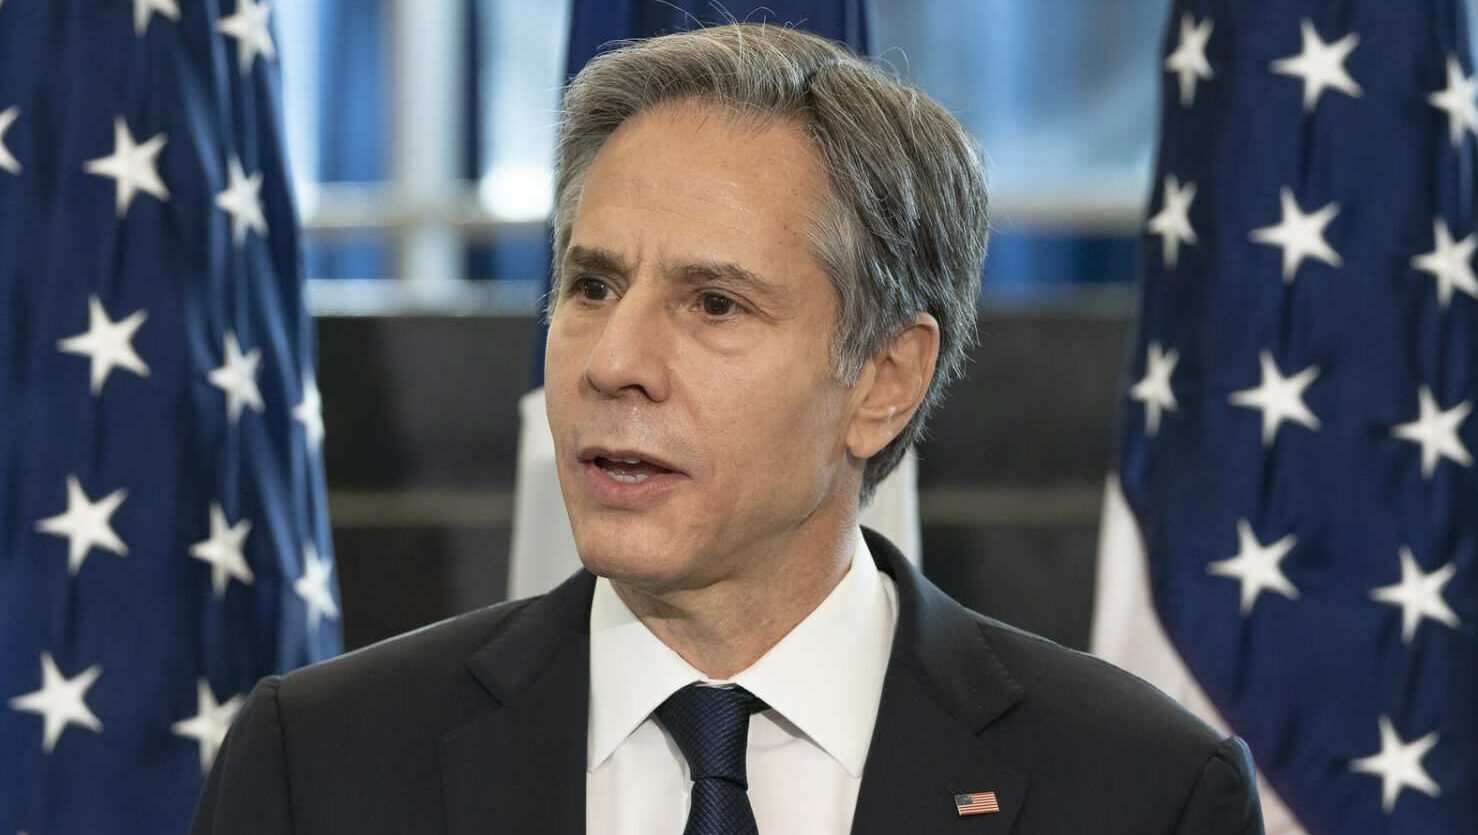 US Sec State Blinken says China ‘will be held to account’ for Xinjiang abuses at UN Rights Council